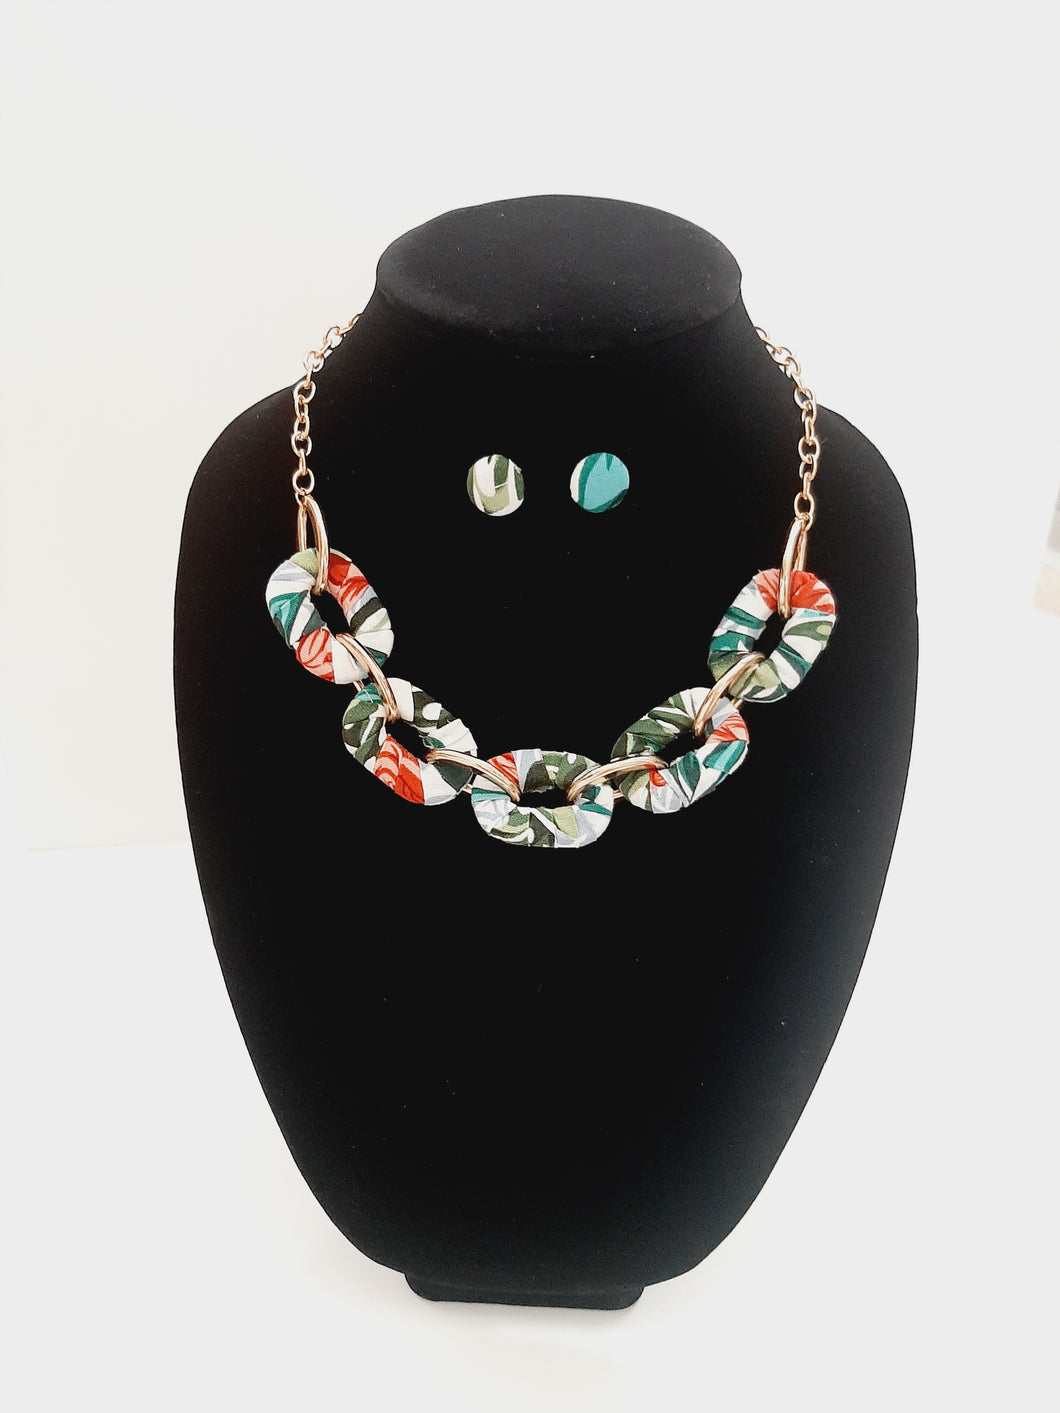 This flawless chain tropical floral material necklace set is a dream. Not only will it give you the party look you desire, but also make it simple to transition from summer to fall and even winter.